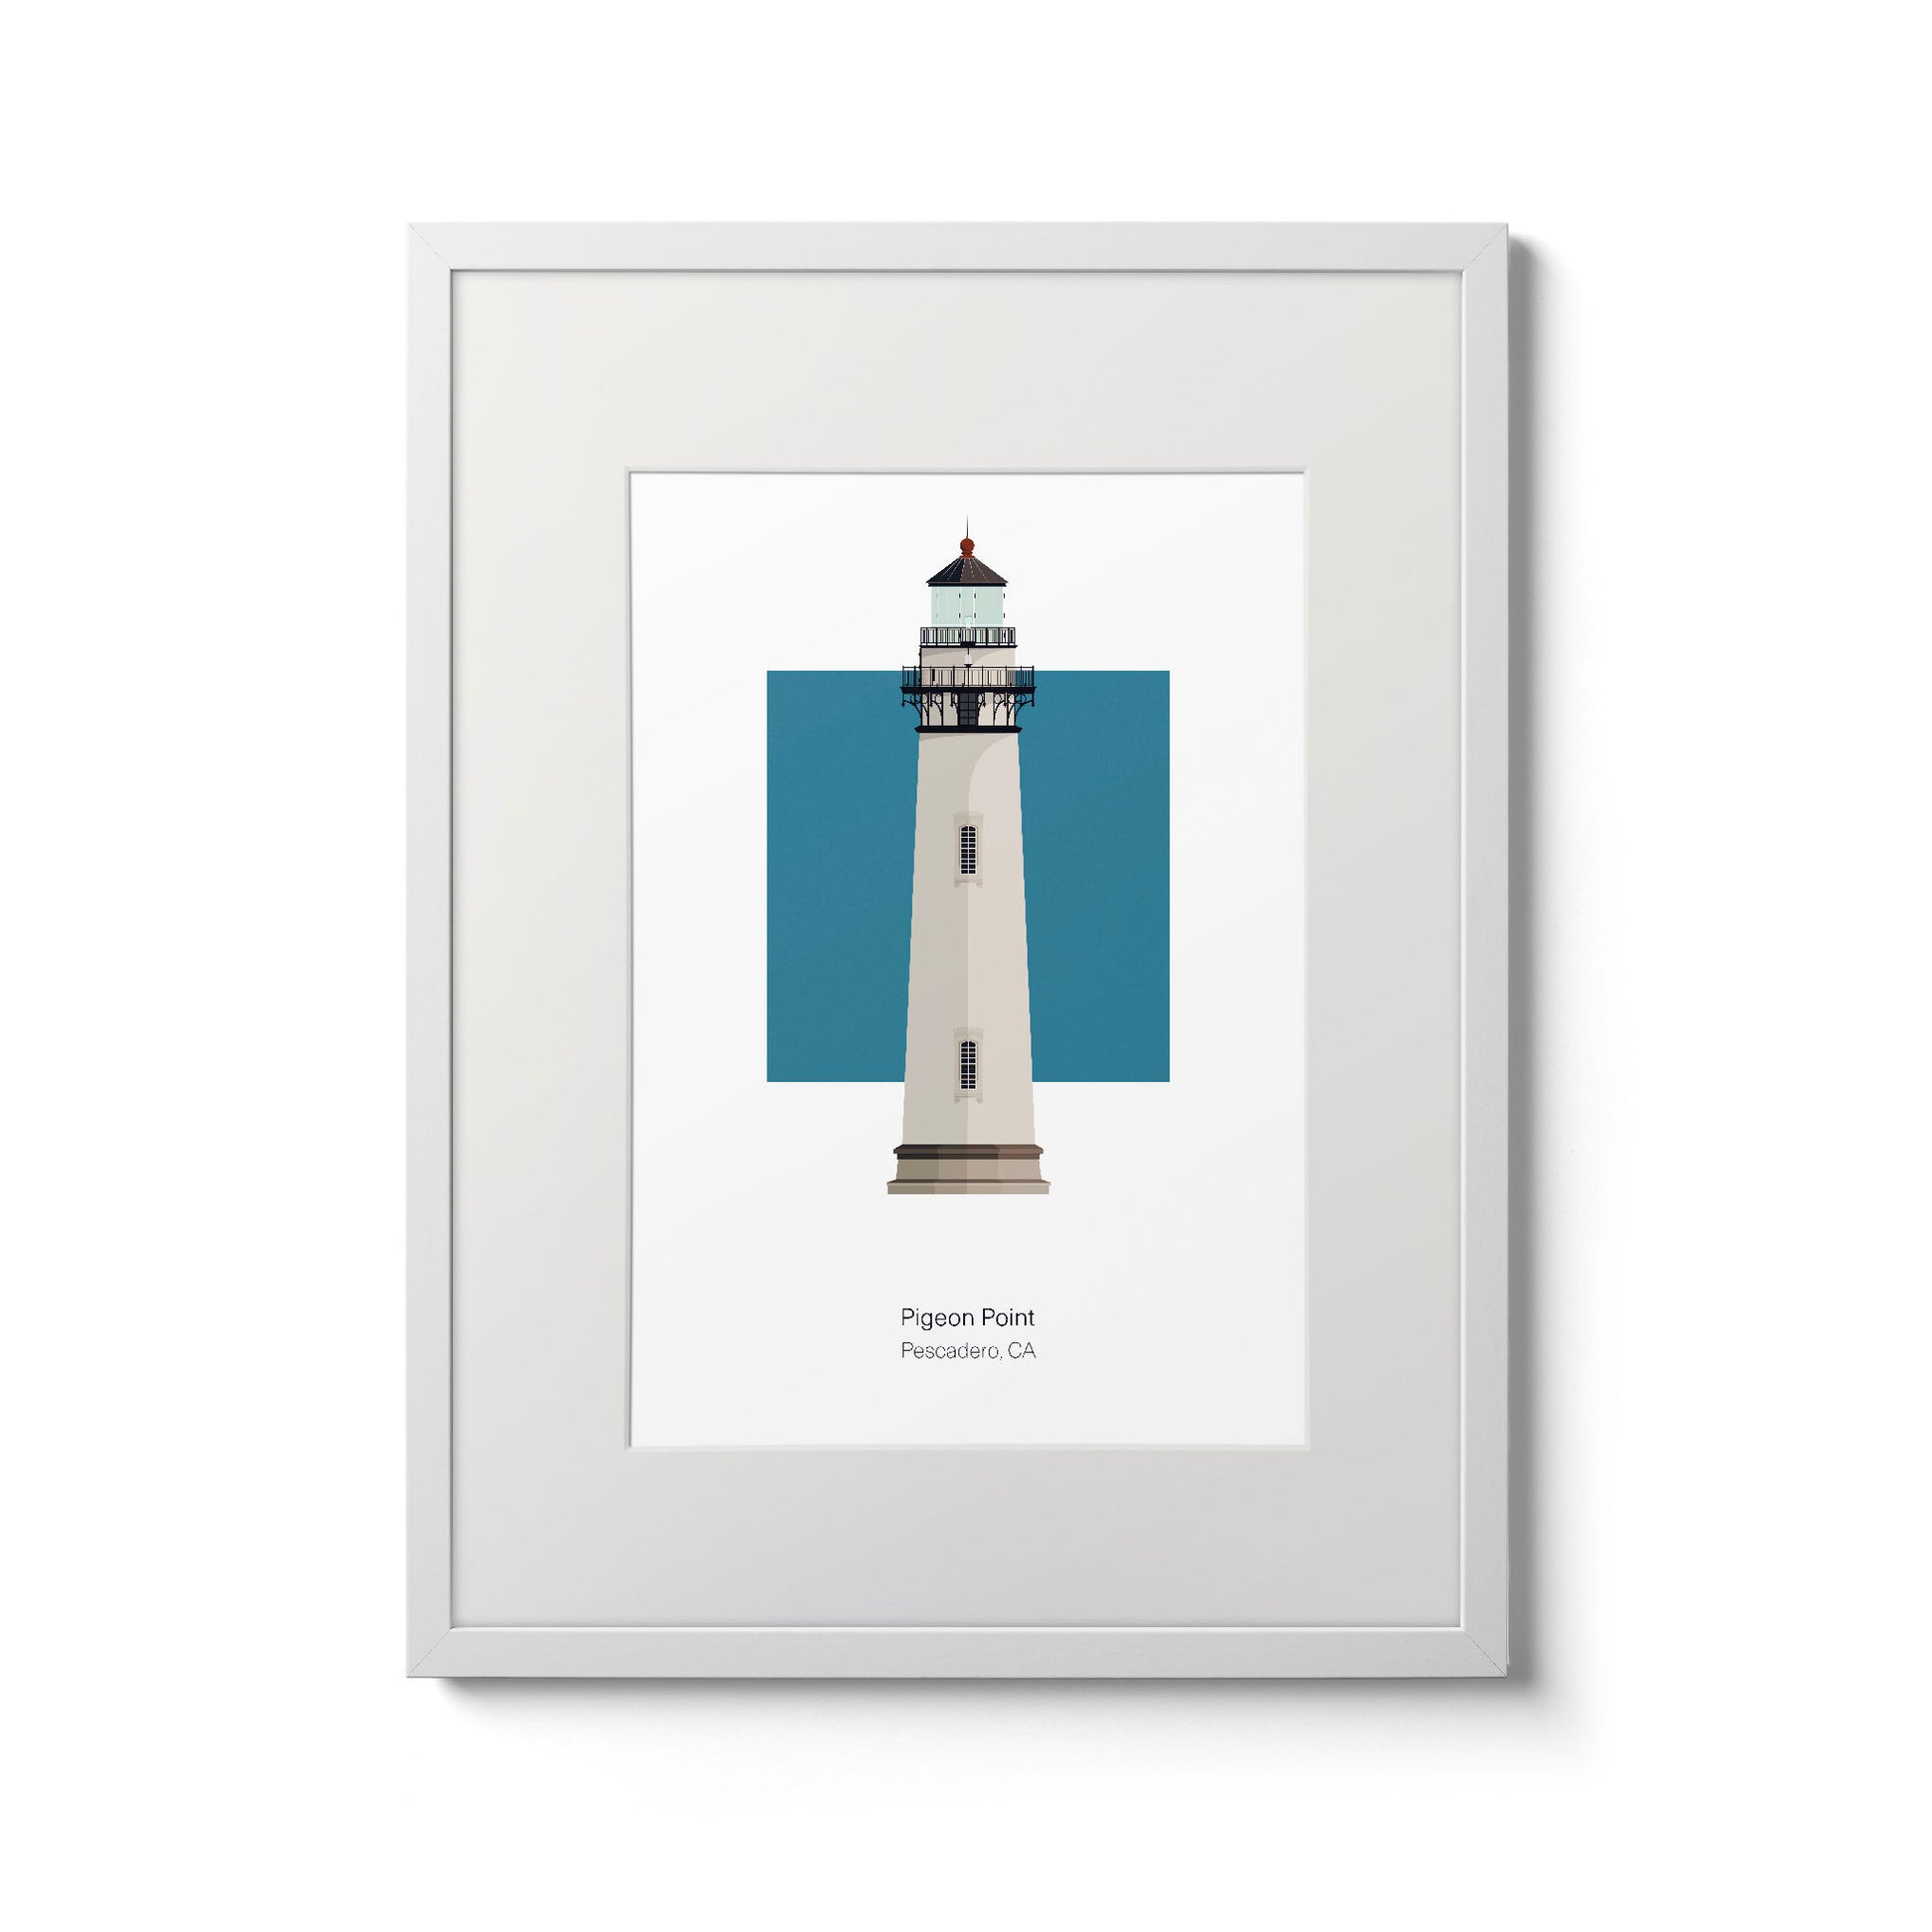 Illustration of the Pigeon Point lighthouse, California, USA. On a white background with aqua blue square as a backdrop., in a white frame  and measuring 11"x14" (30x40cm).